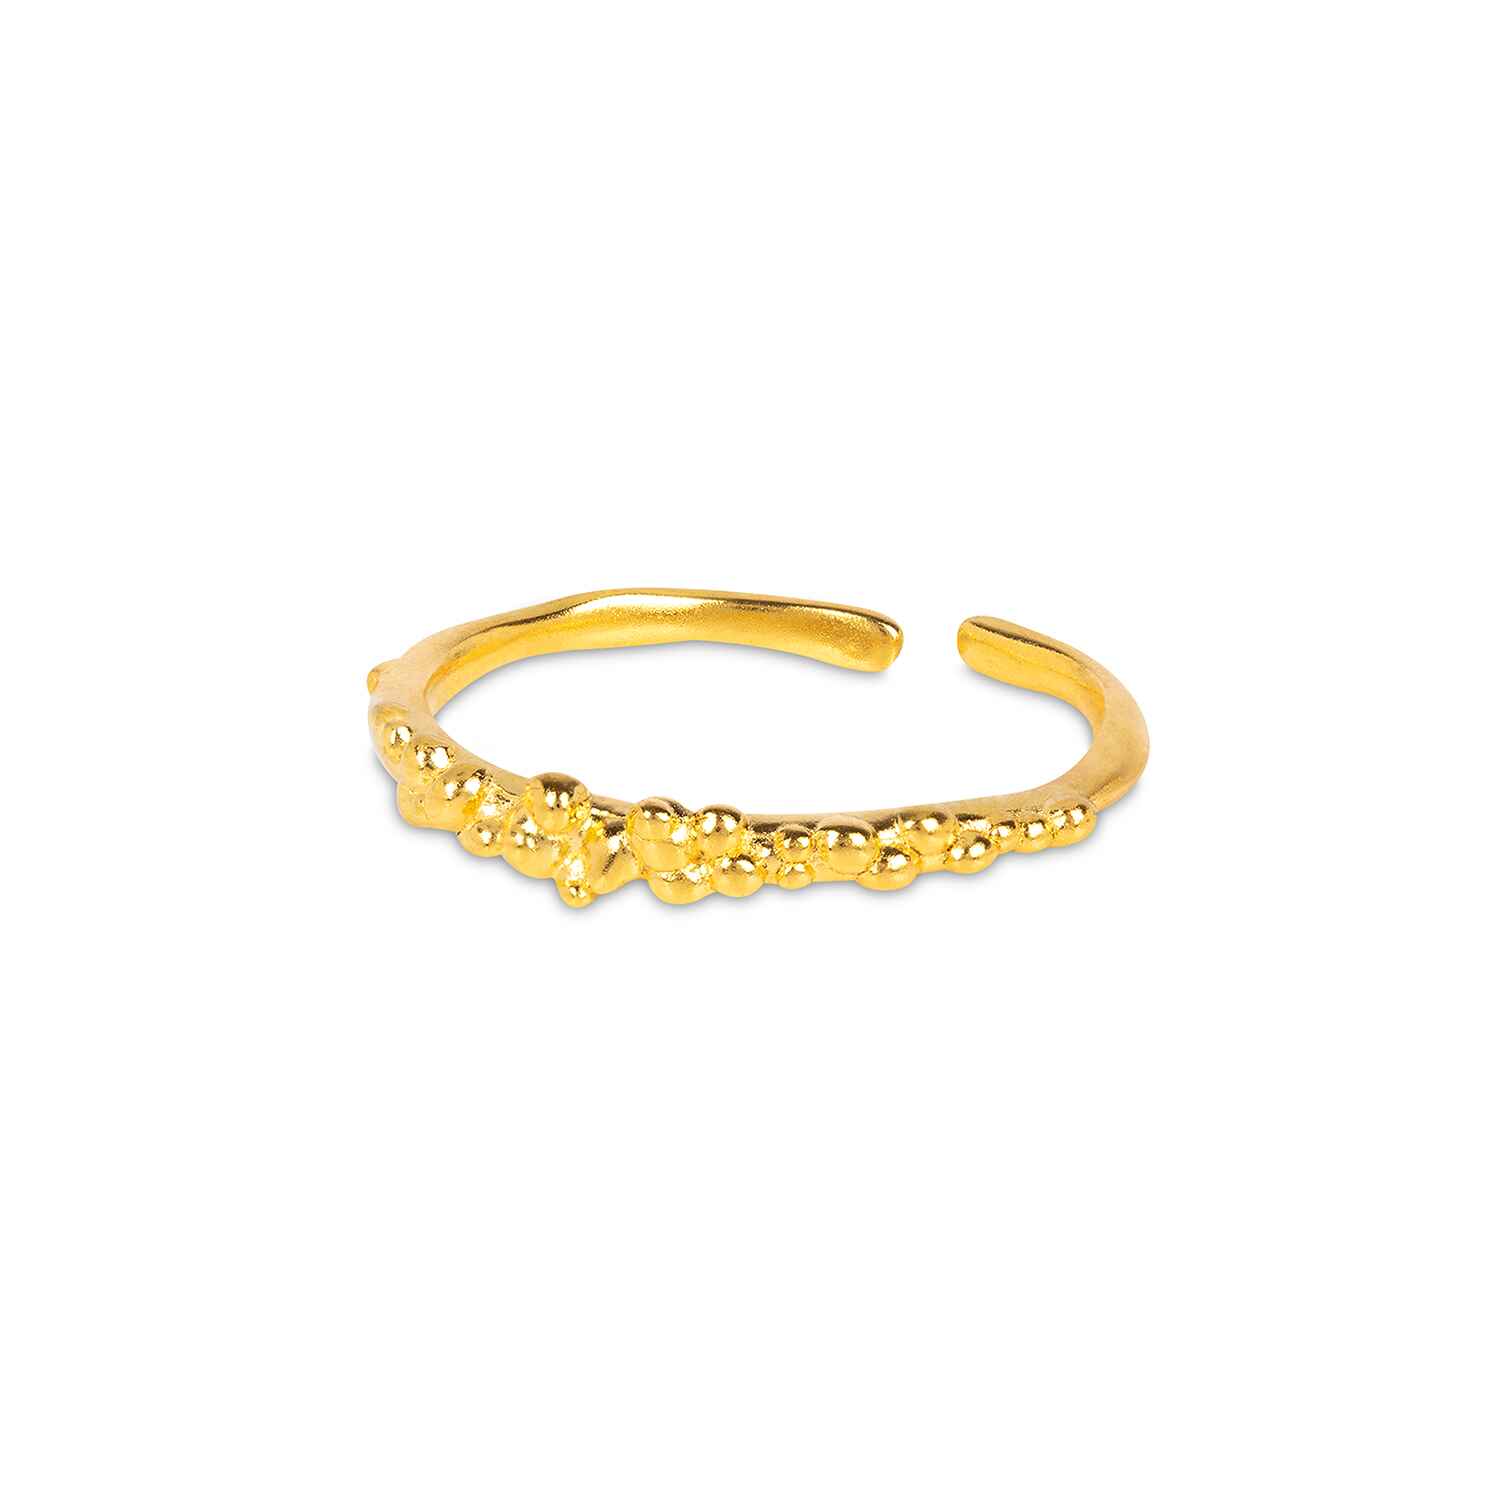 The Caviar ring is a size adjustable stacking band formed of tiny gold balls jotted across the ring. Handmade with recycled 18k gold vermeil it is best worn in multiples on different fingers to flatter the line of the hand